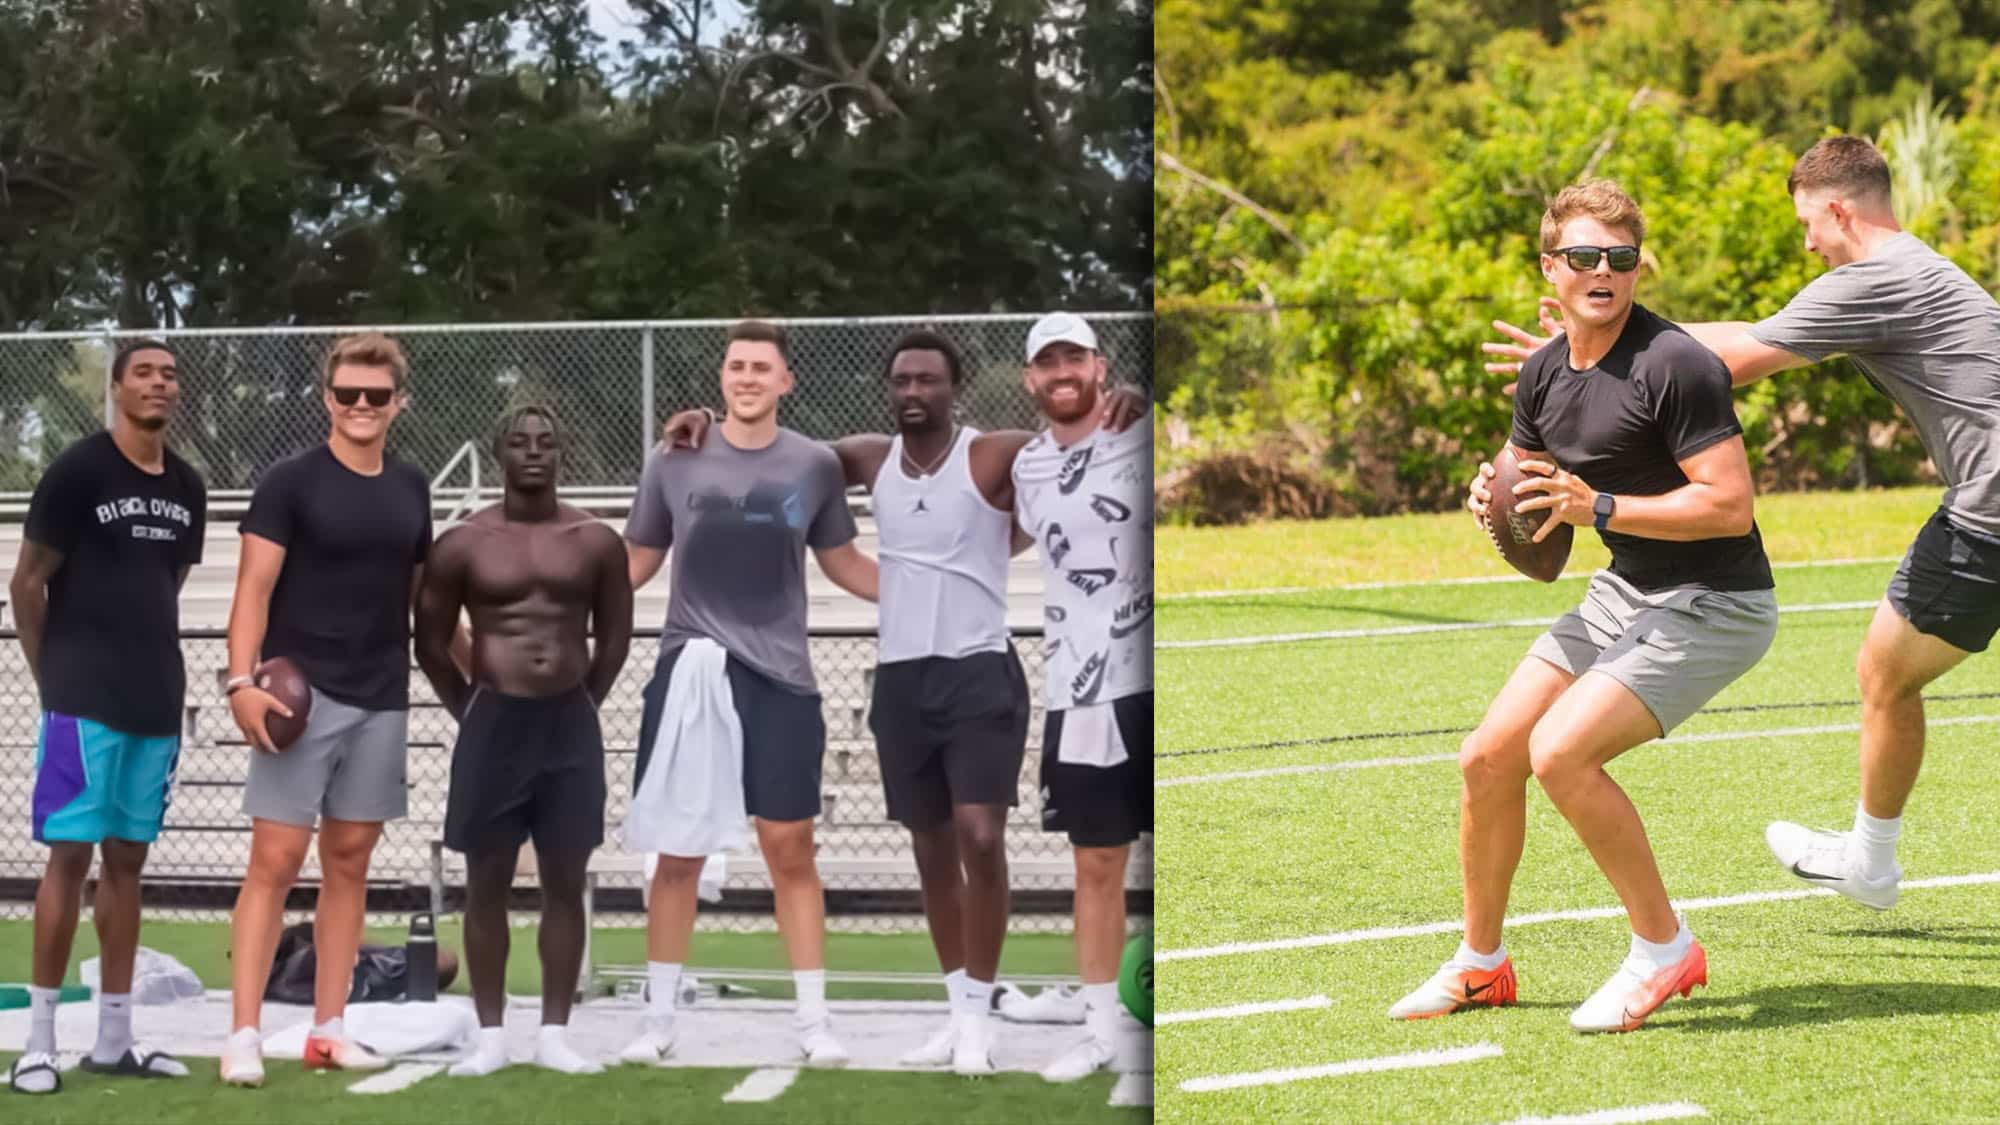 Zach Wilson, Corey Davis and other NY Jets work out in Tampa together.